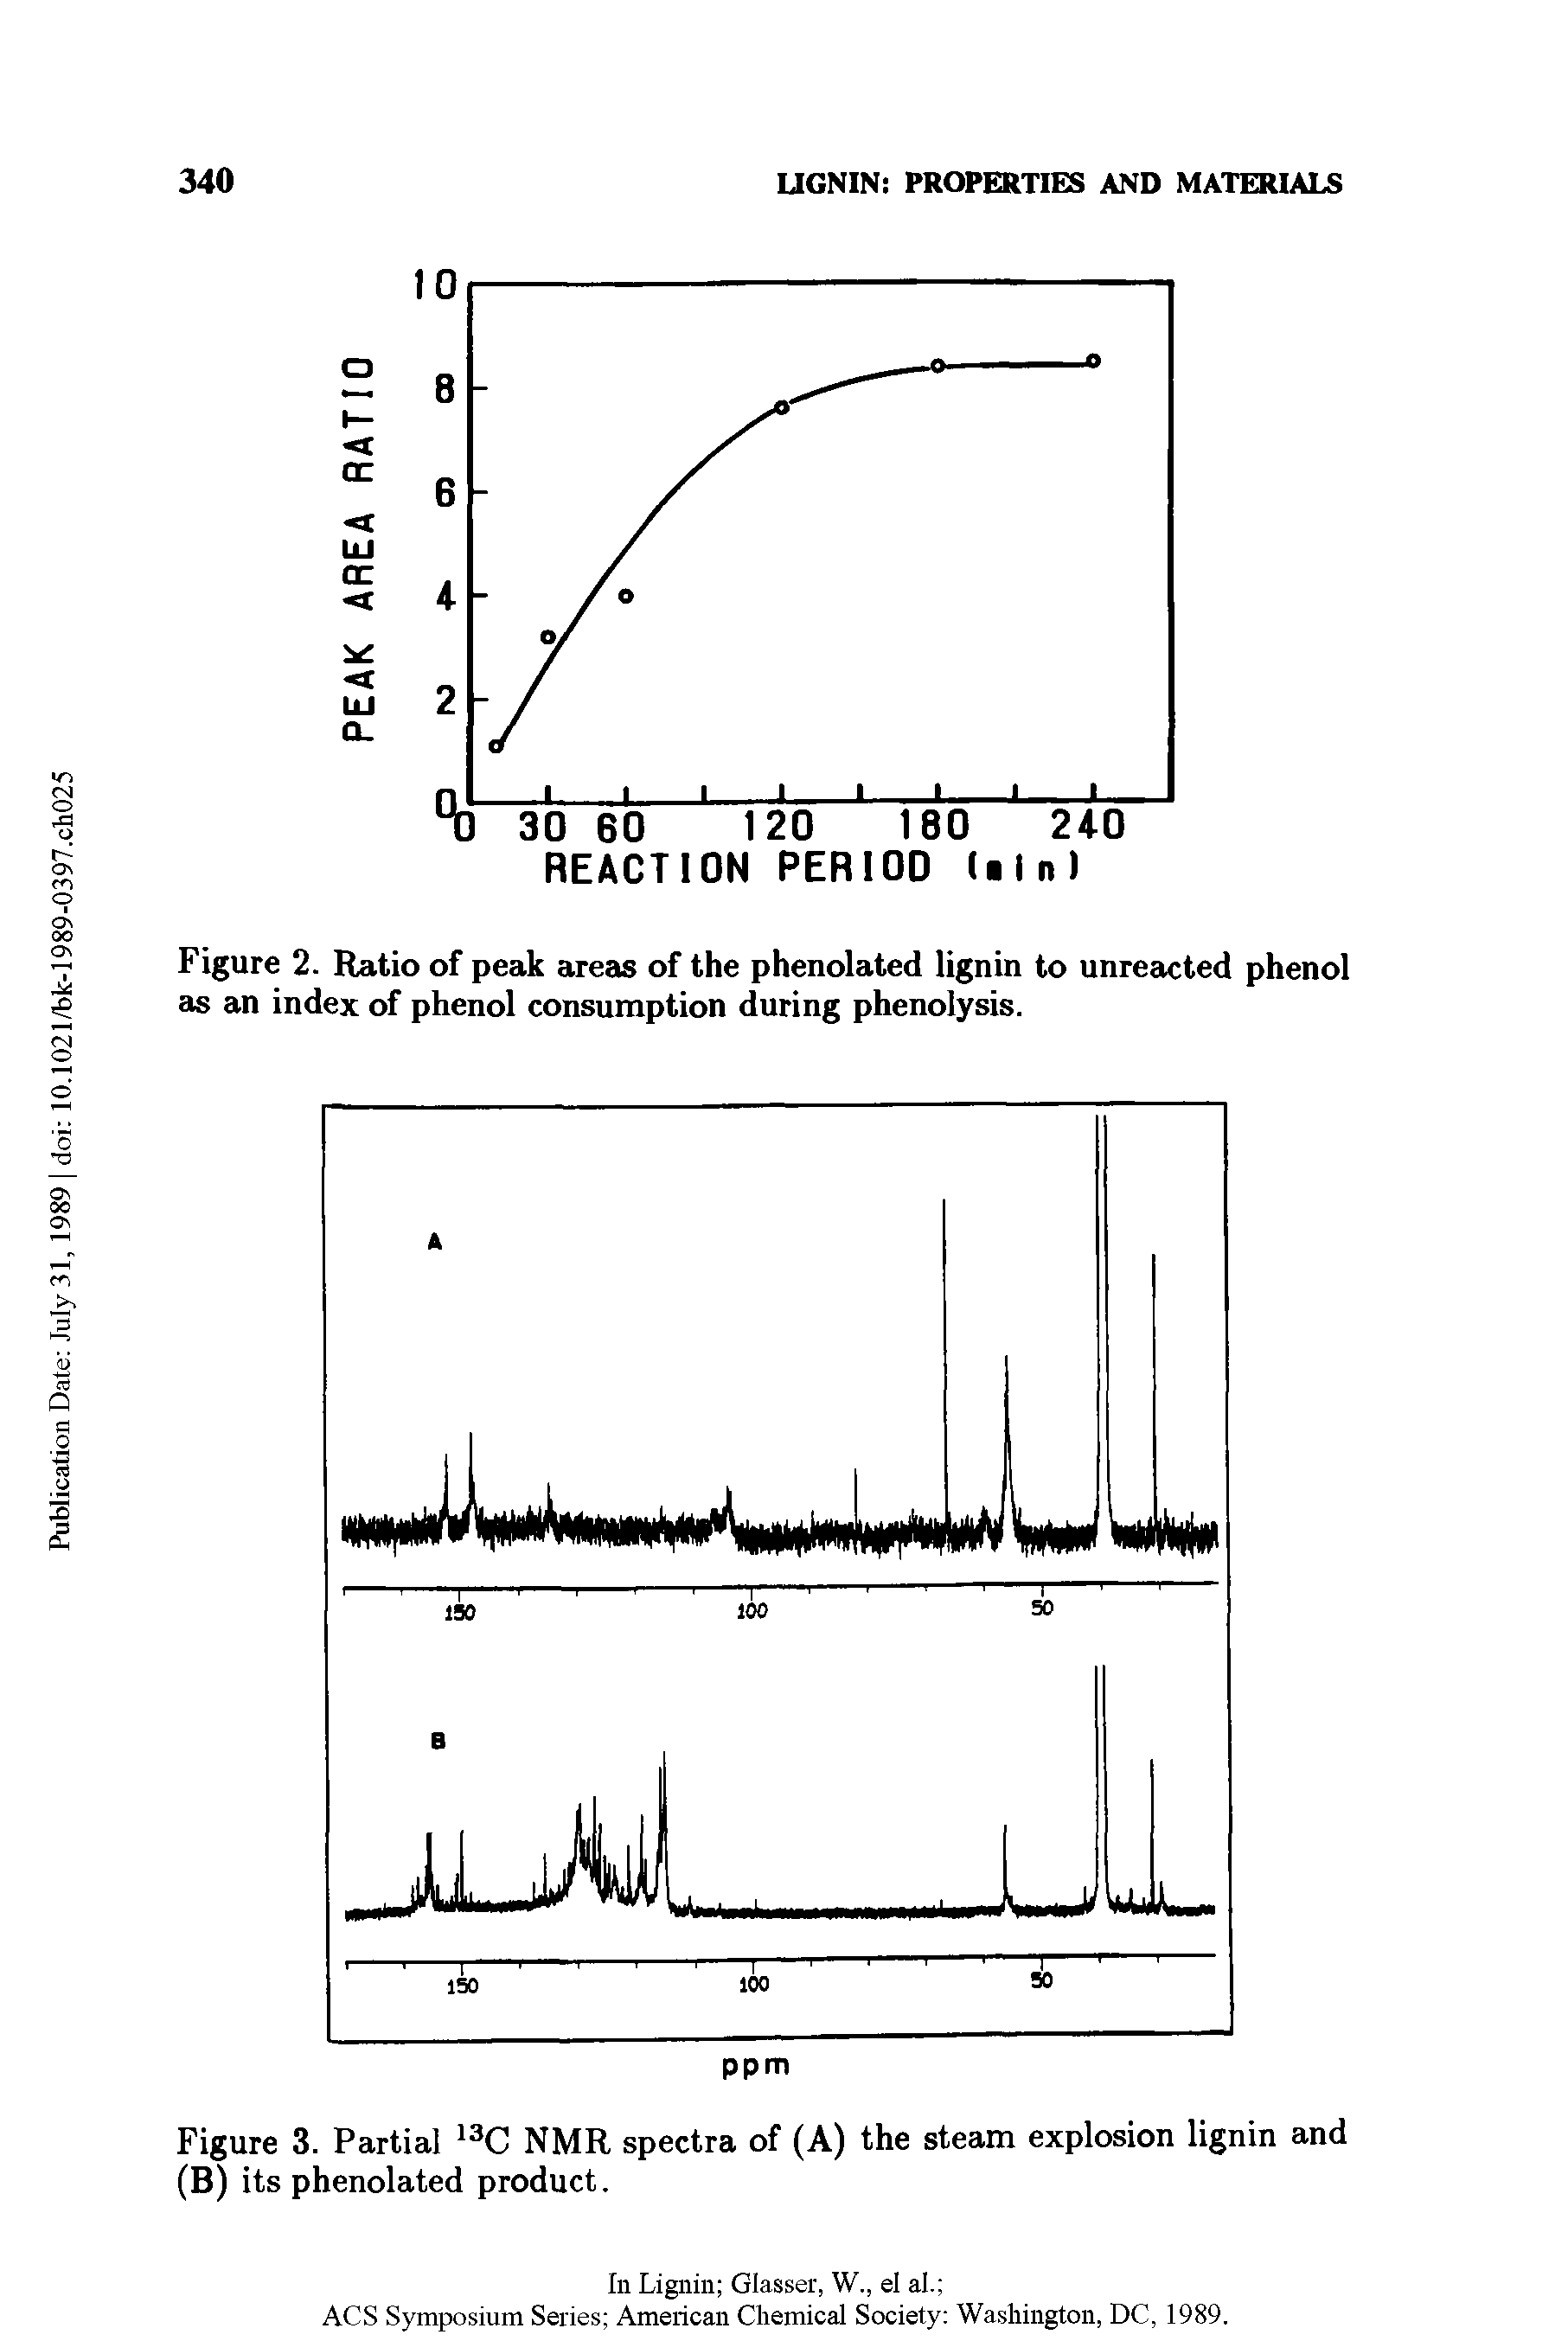 Figure 3. Partial 13C NMR spectra of (A) the steam explosion lignin and (B) its phenolated product.